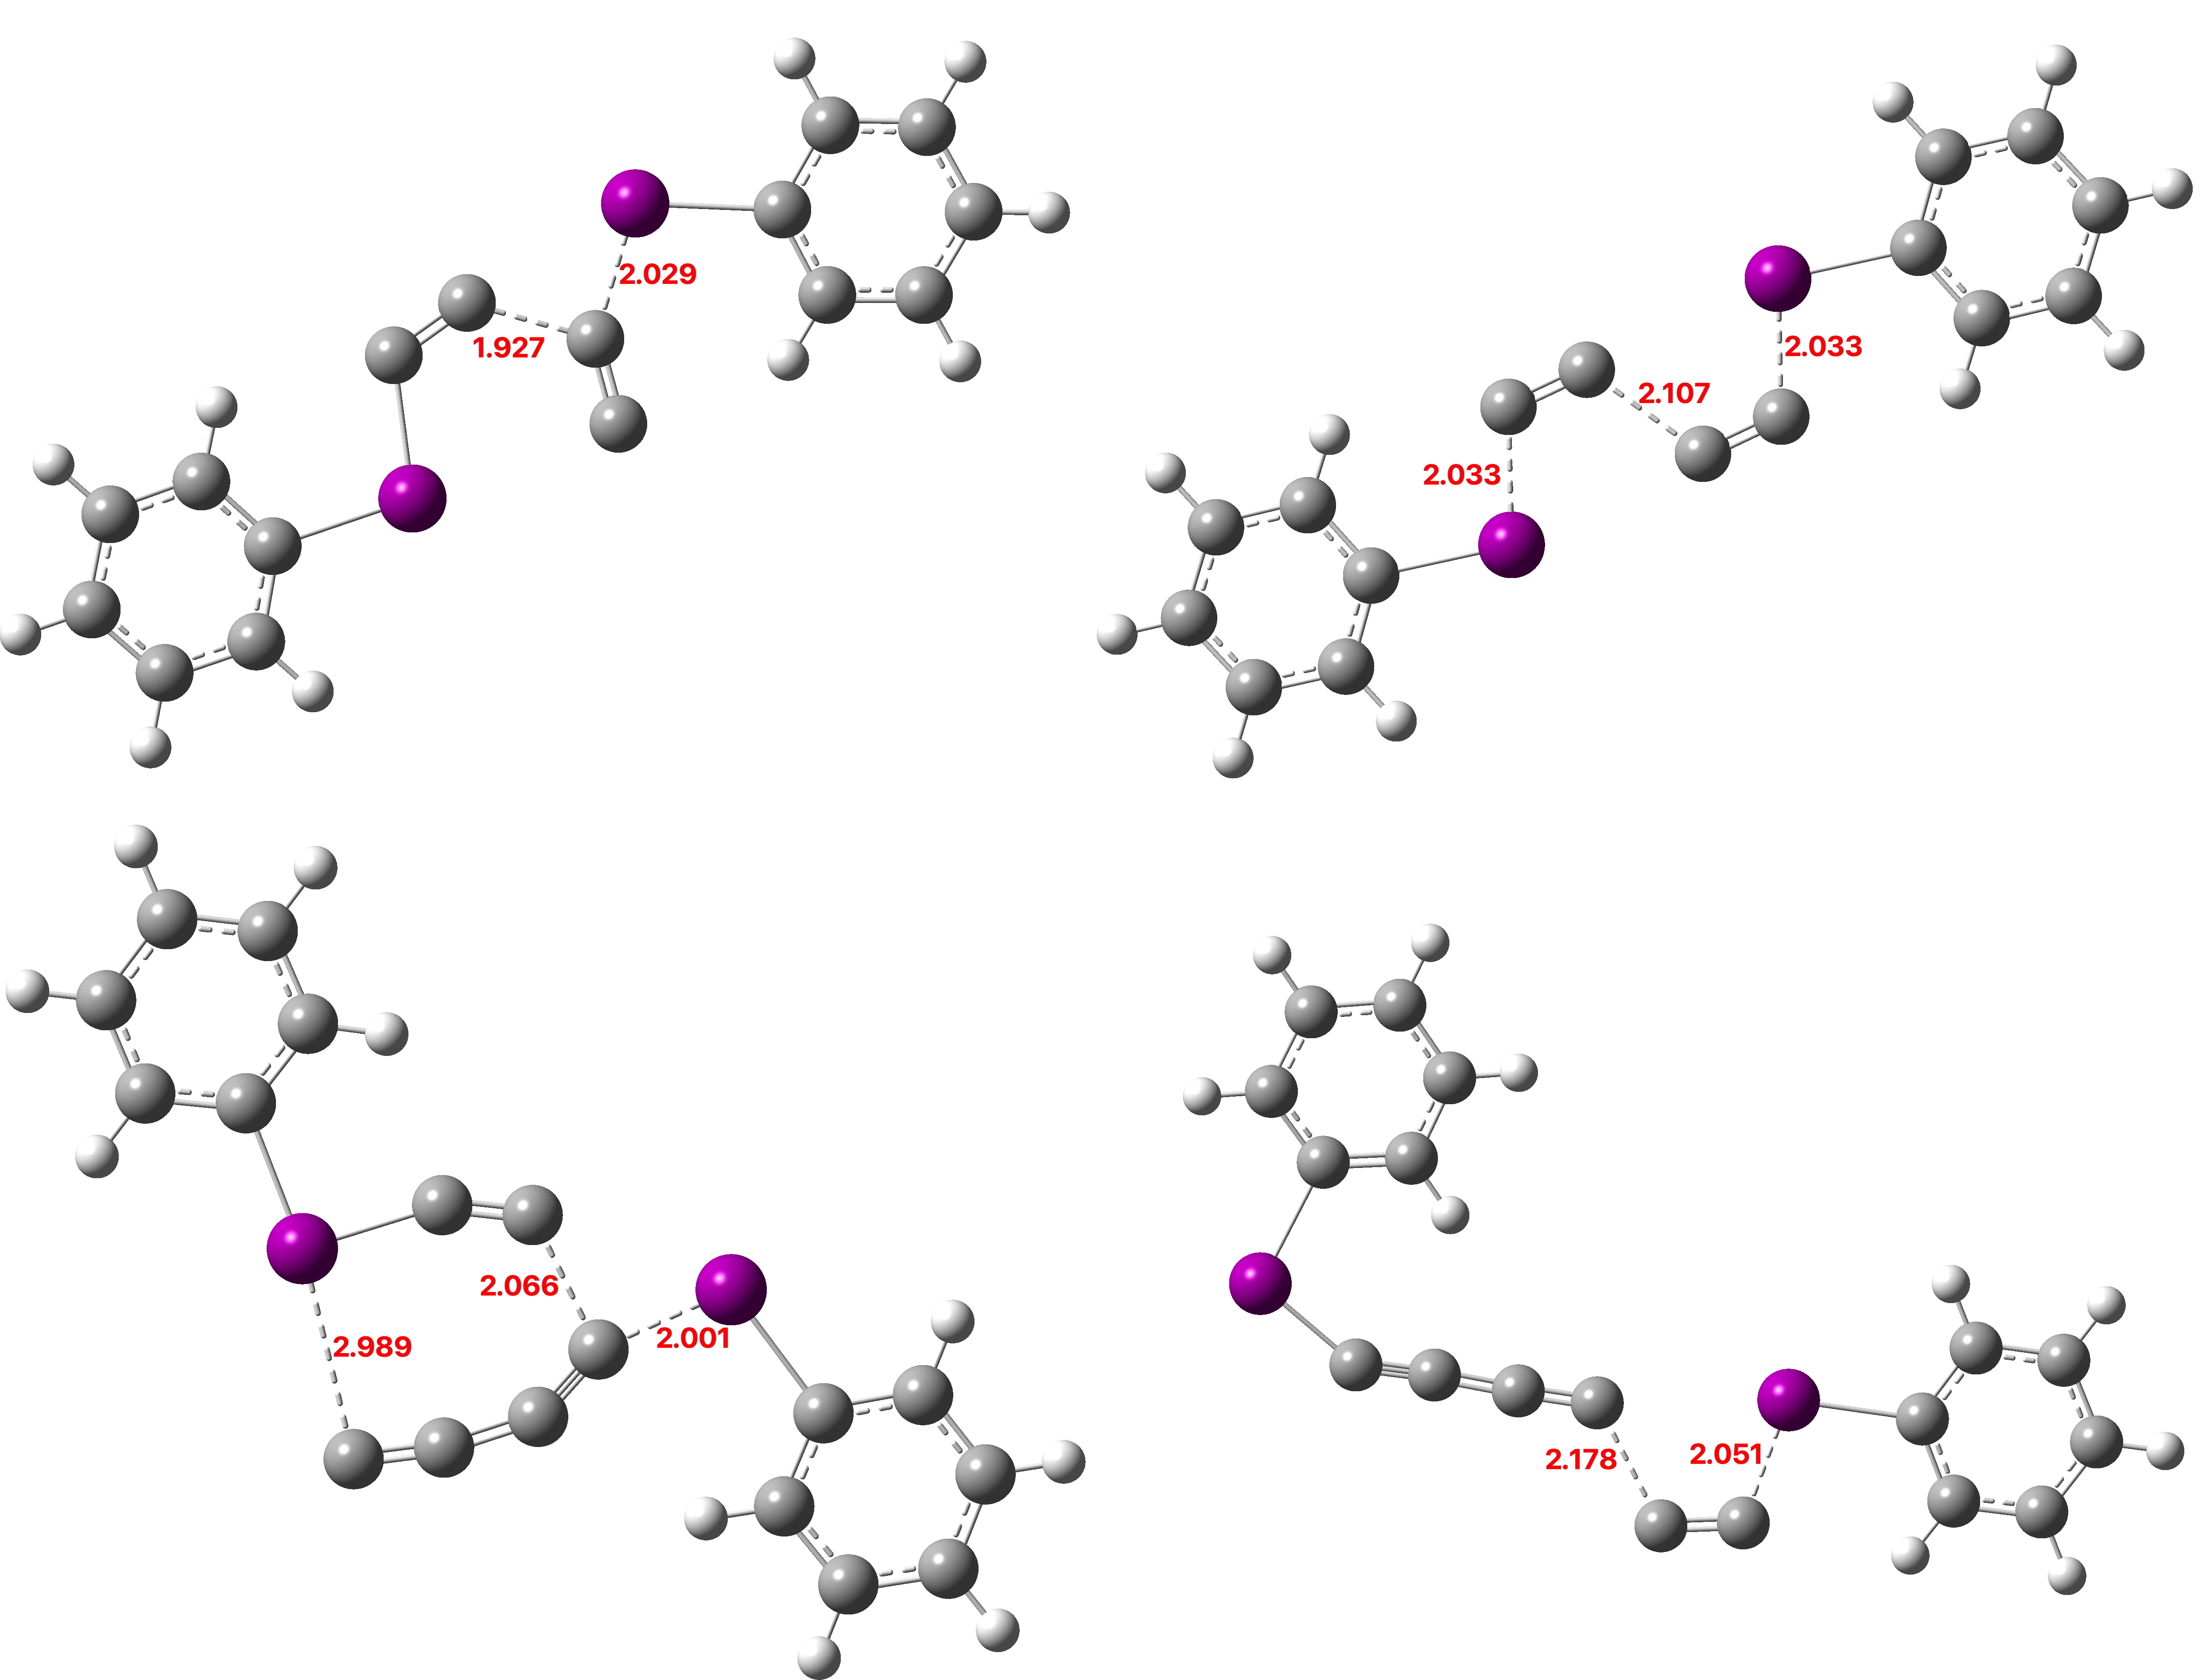 Models for competing 1,1- and 1,2- substitution reactions of 11 with itself. Distances in Å.